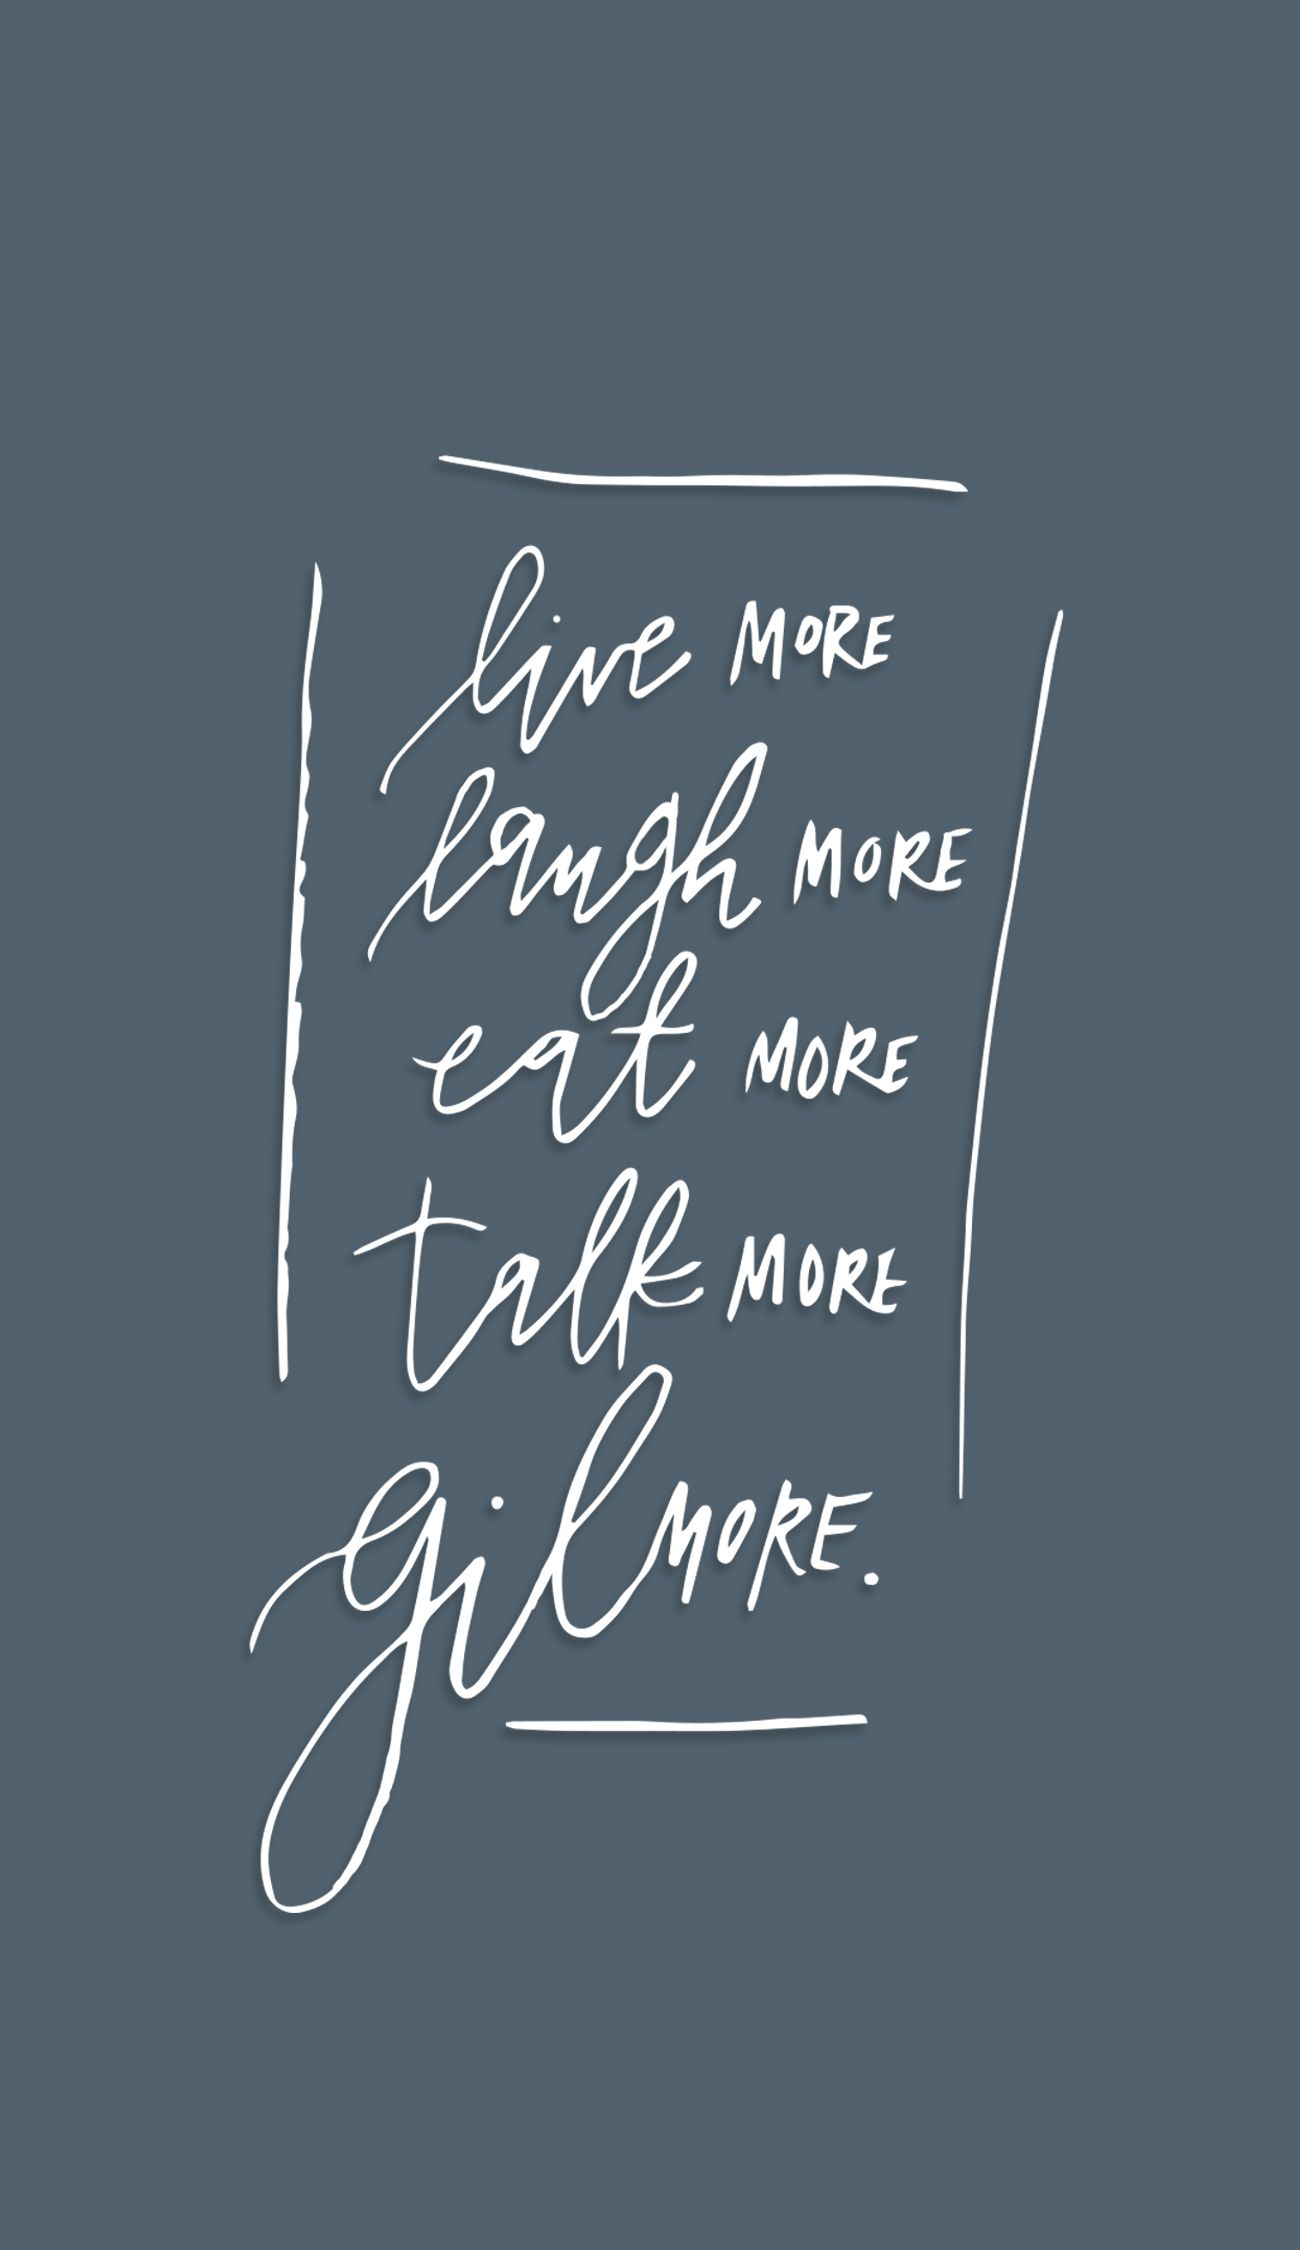 A Few Free Iphone Wallpapers For Gilmore Girls Fans - Calligraphy , HD Wallpaper & Backgrounds